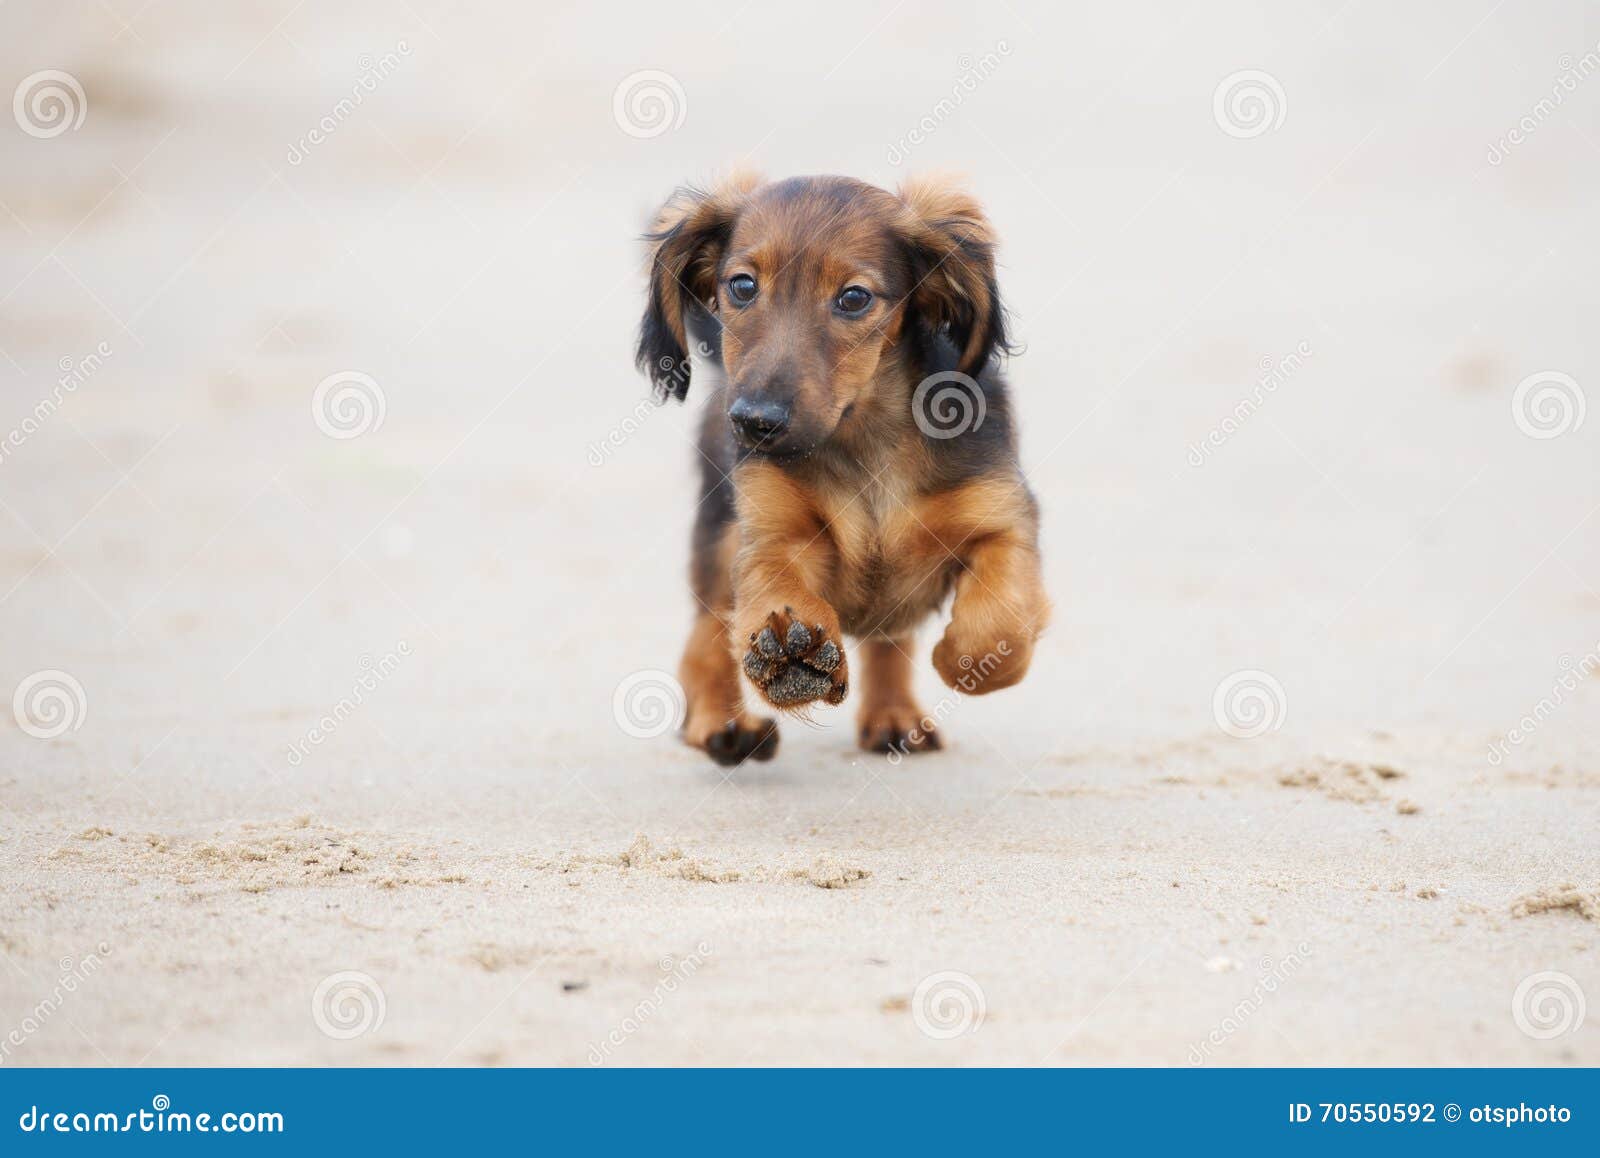 Adorable Dachshund Puppy Running On The Beach Stock Photo Image